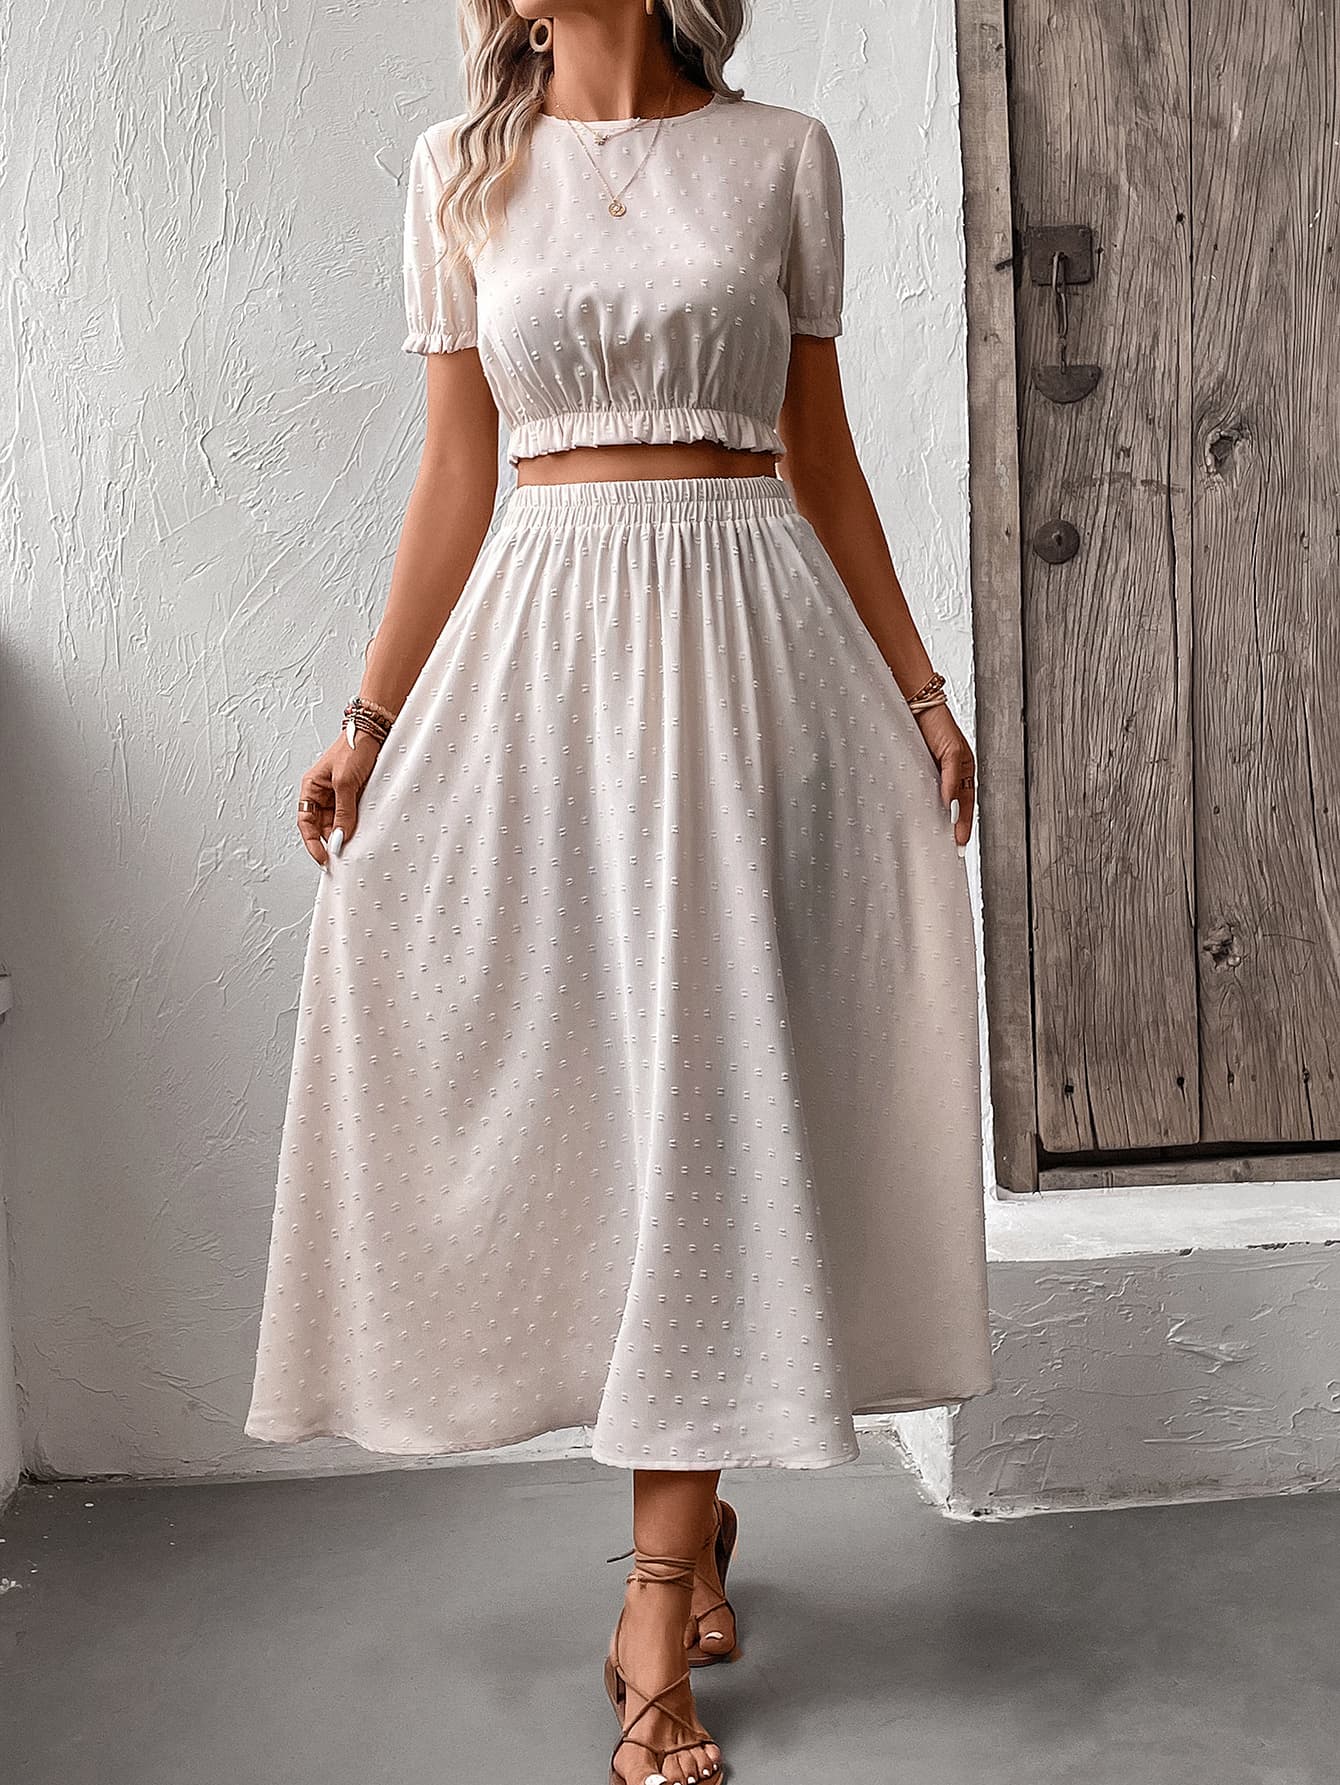 Swiss Dot Cropped Top and Skirt Set